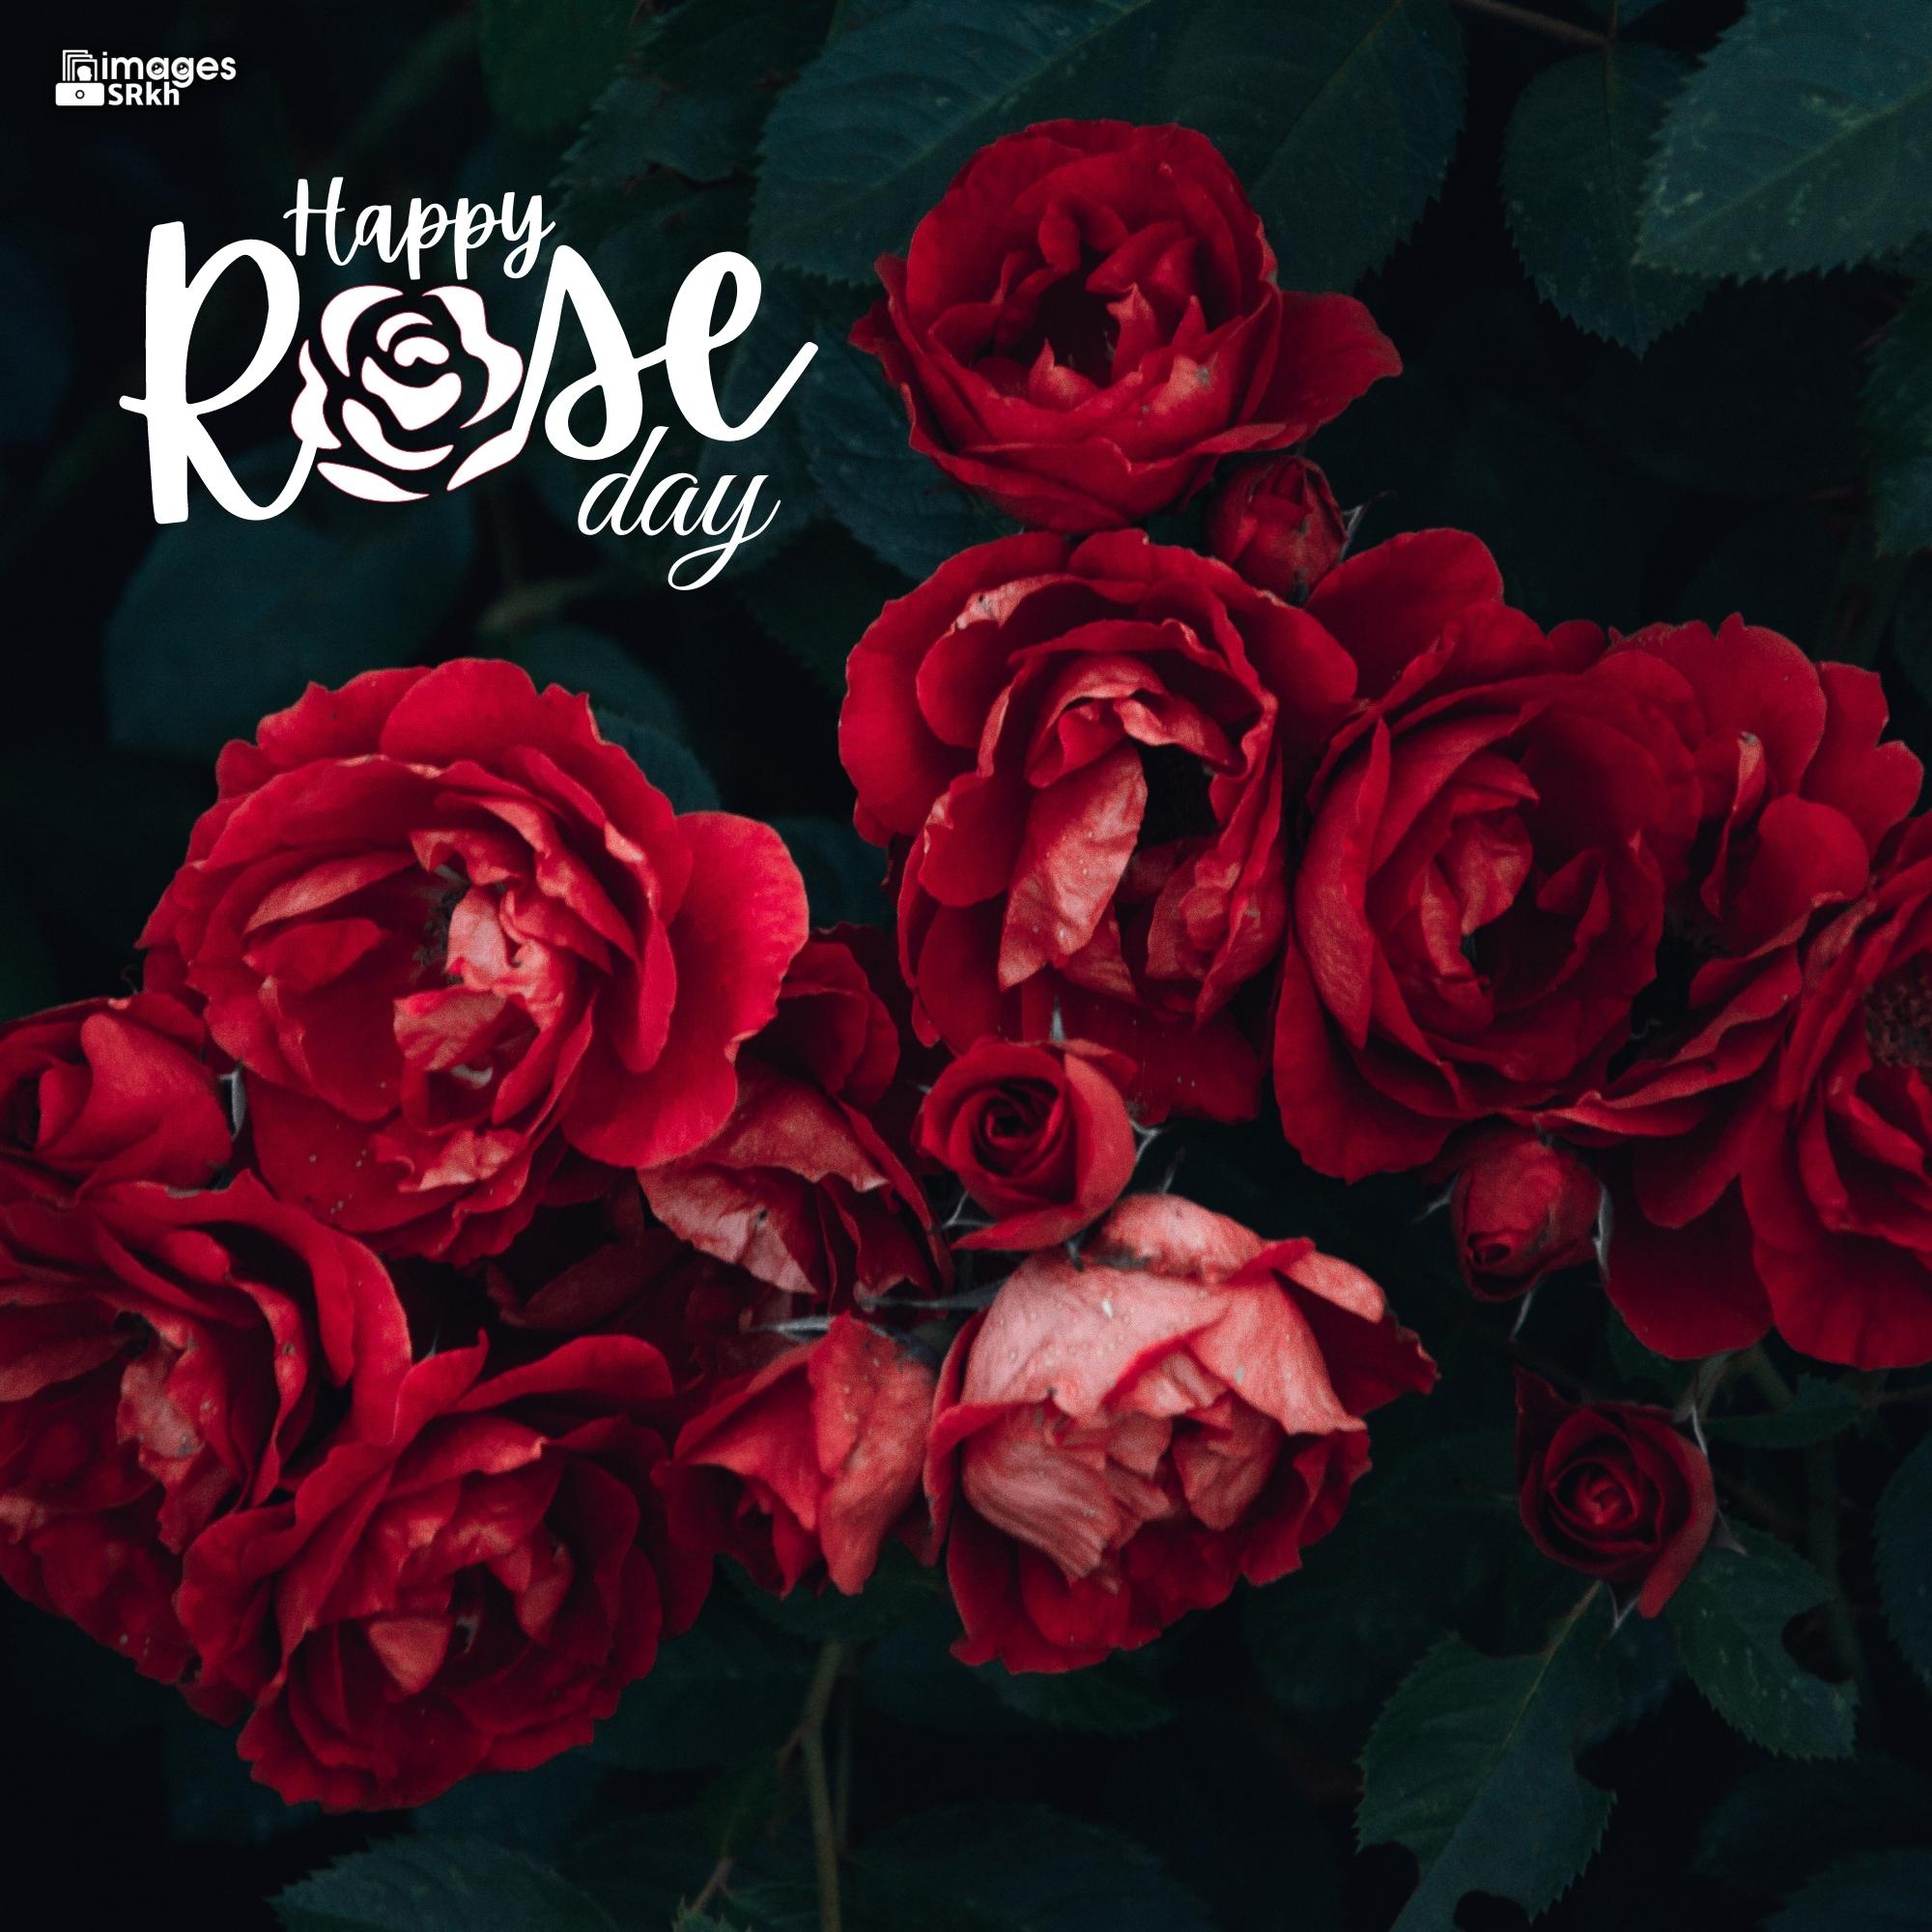 Happy Rose Day Image Hd Download (42)